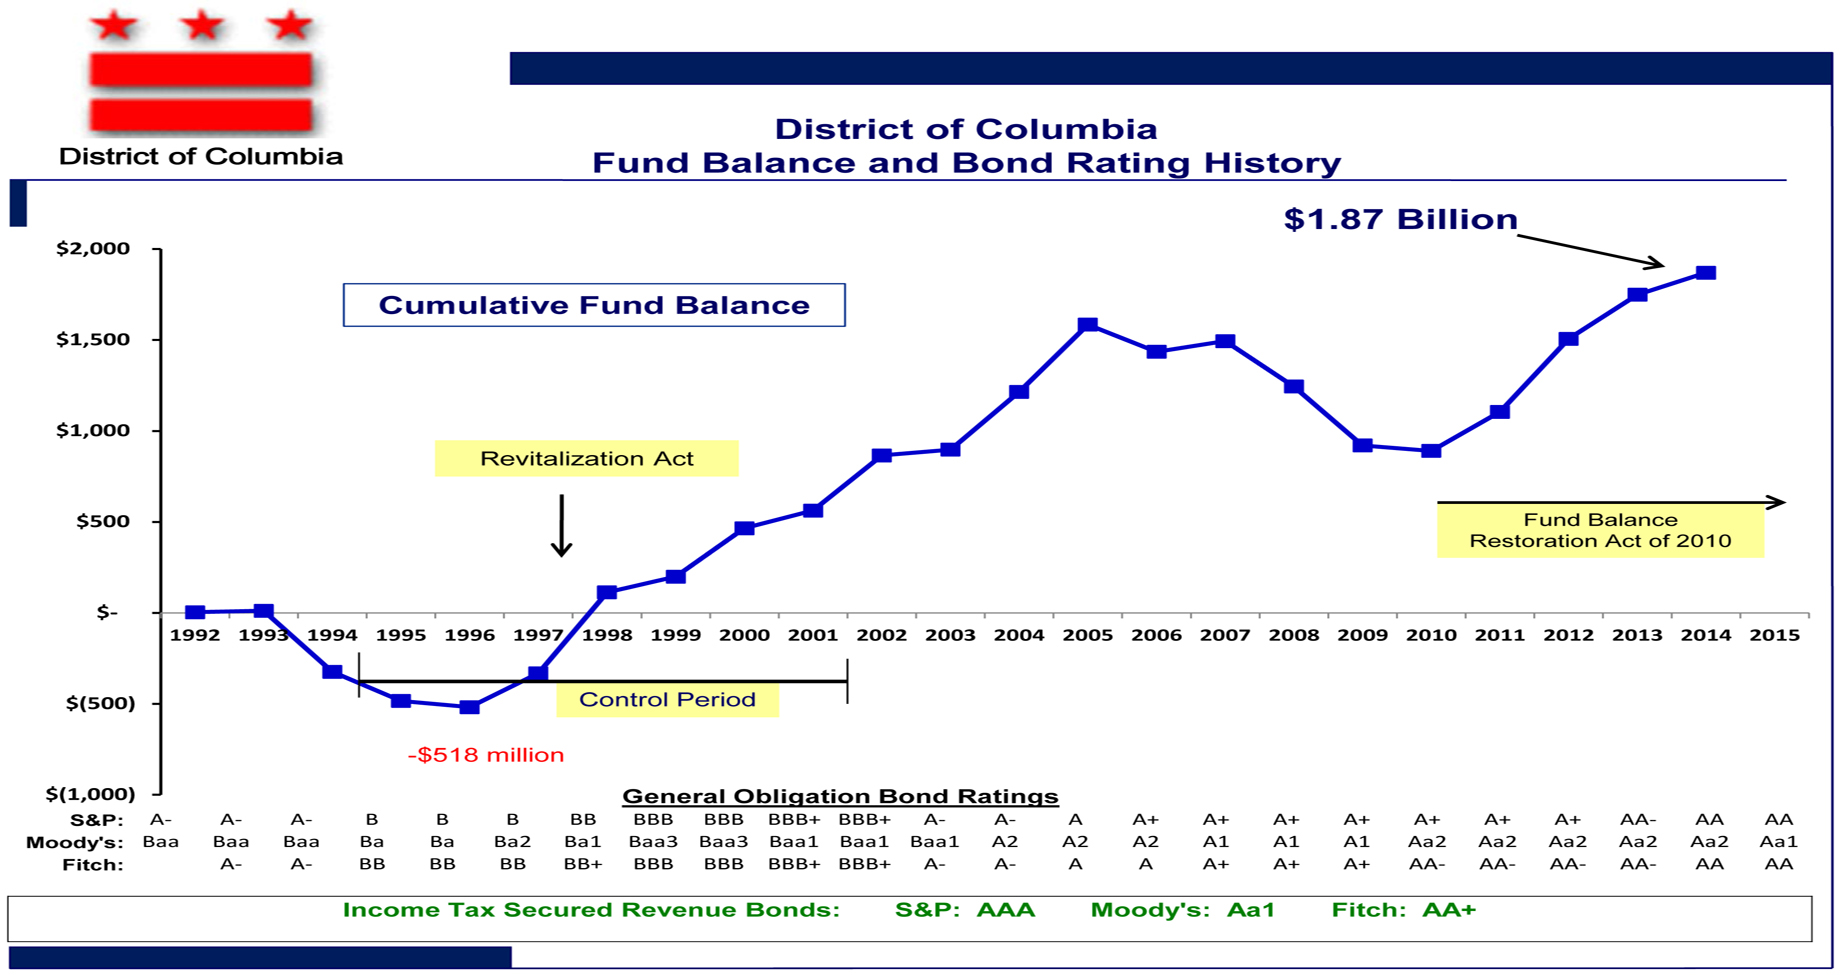 District of Columbia Surplus and Bond Rating History